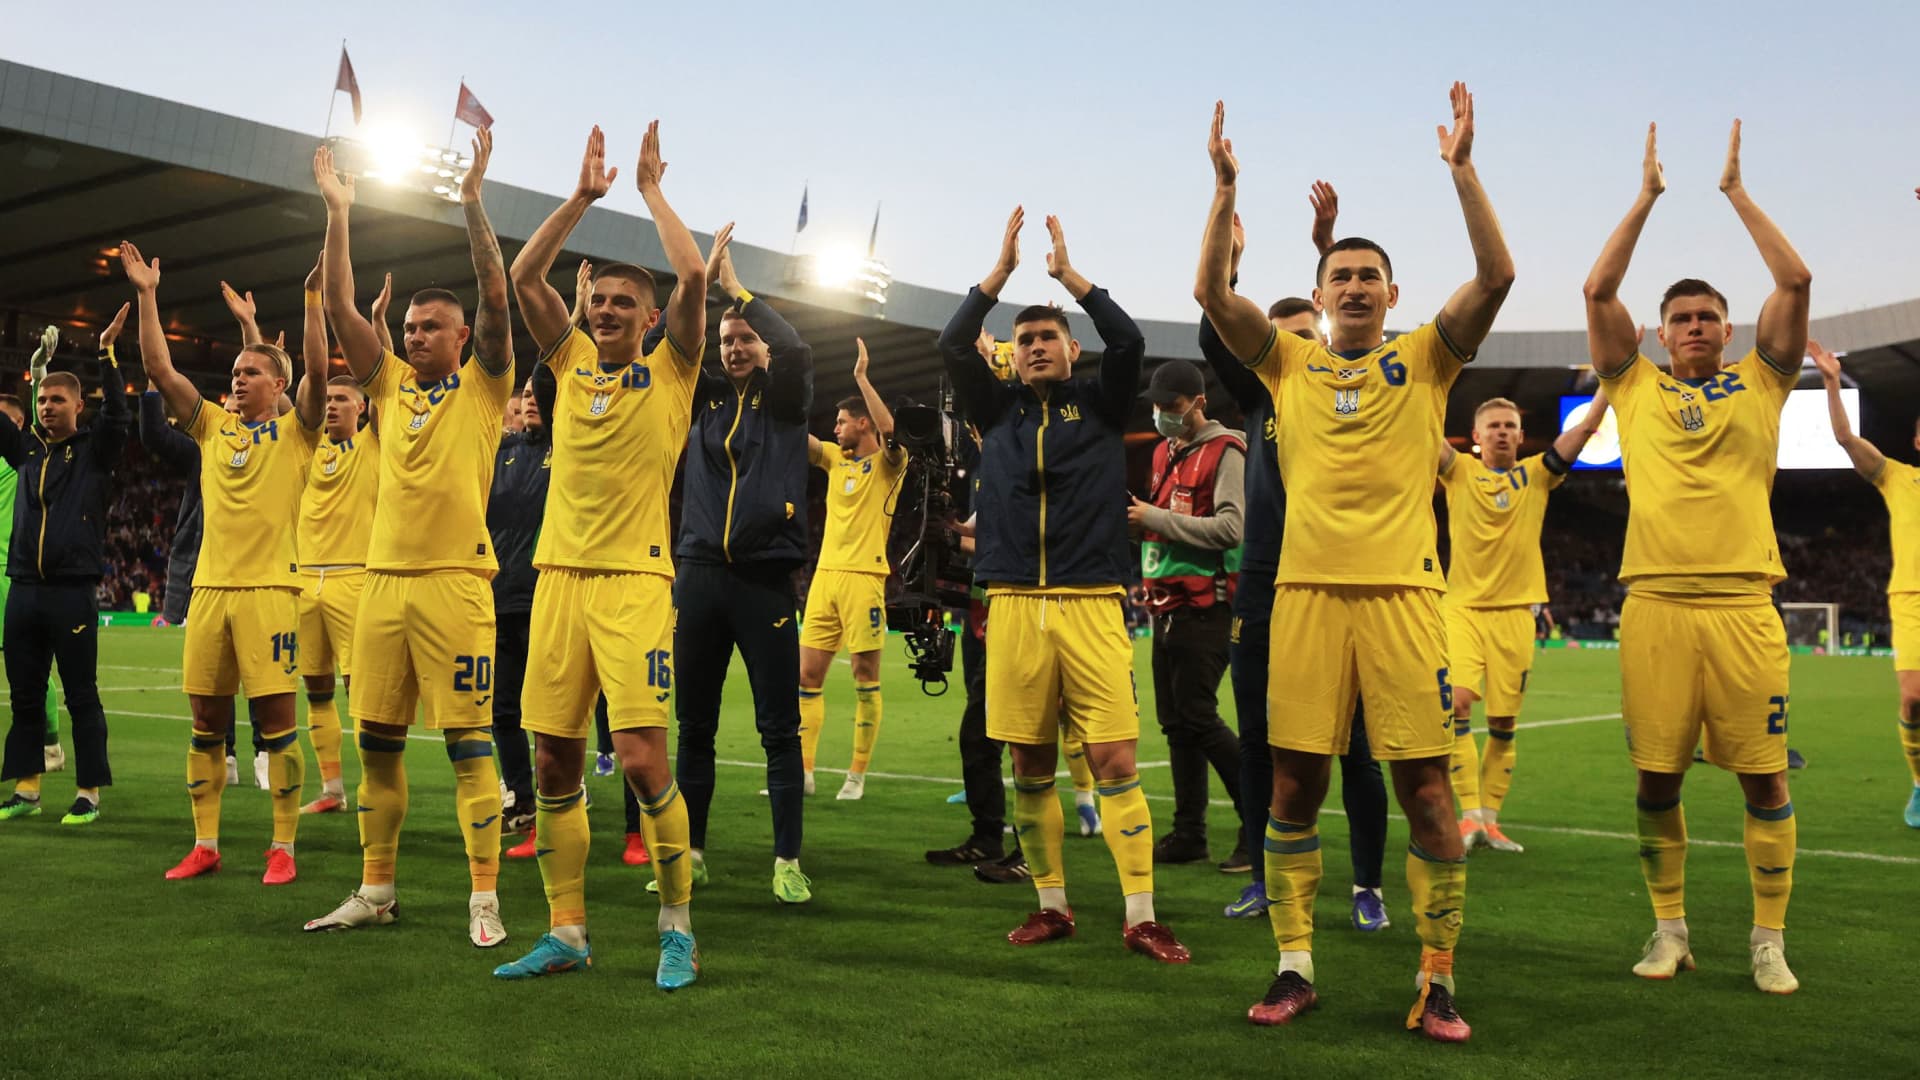 Ukraine players celebrate and applaud their fans after the match.